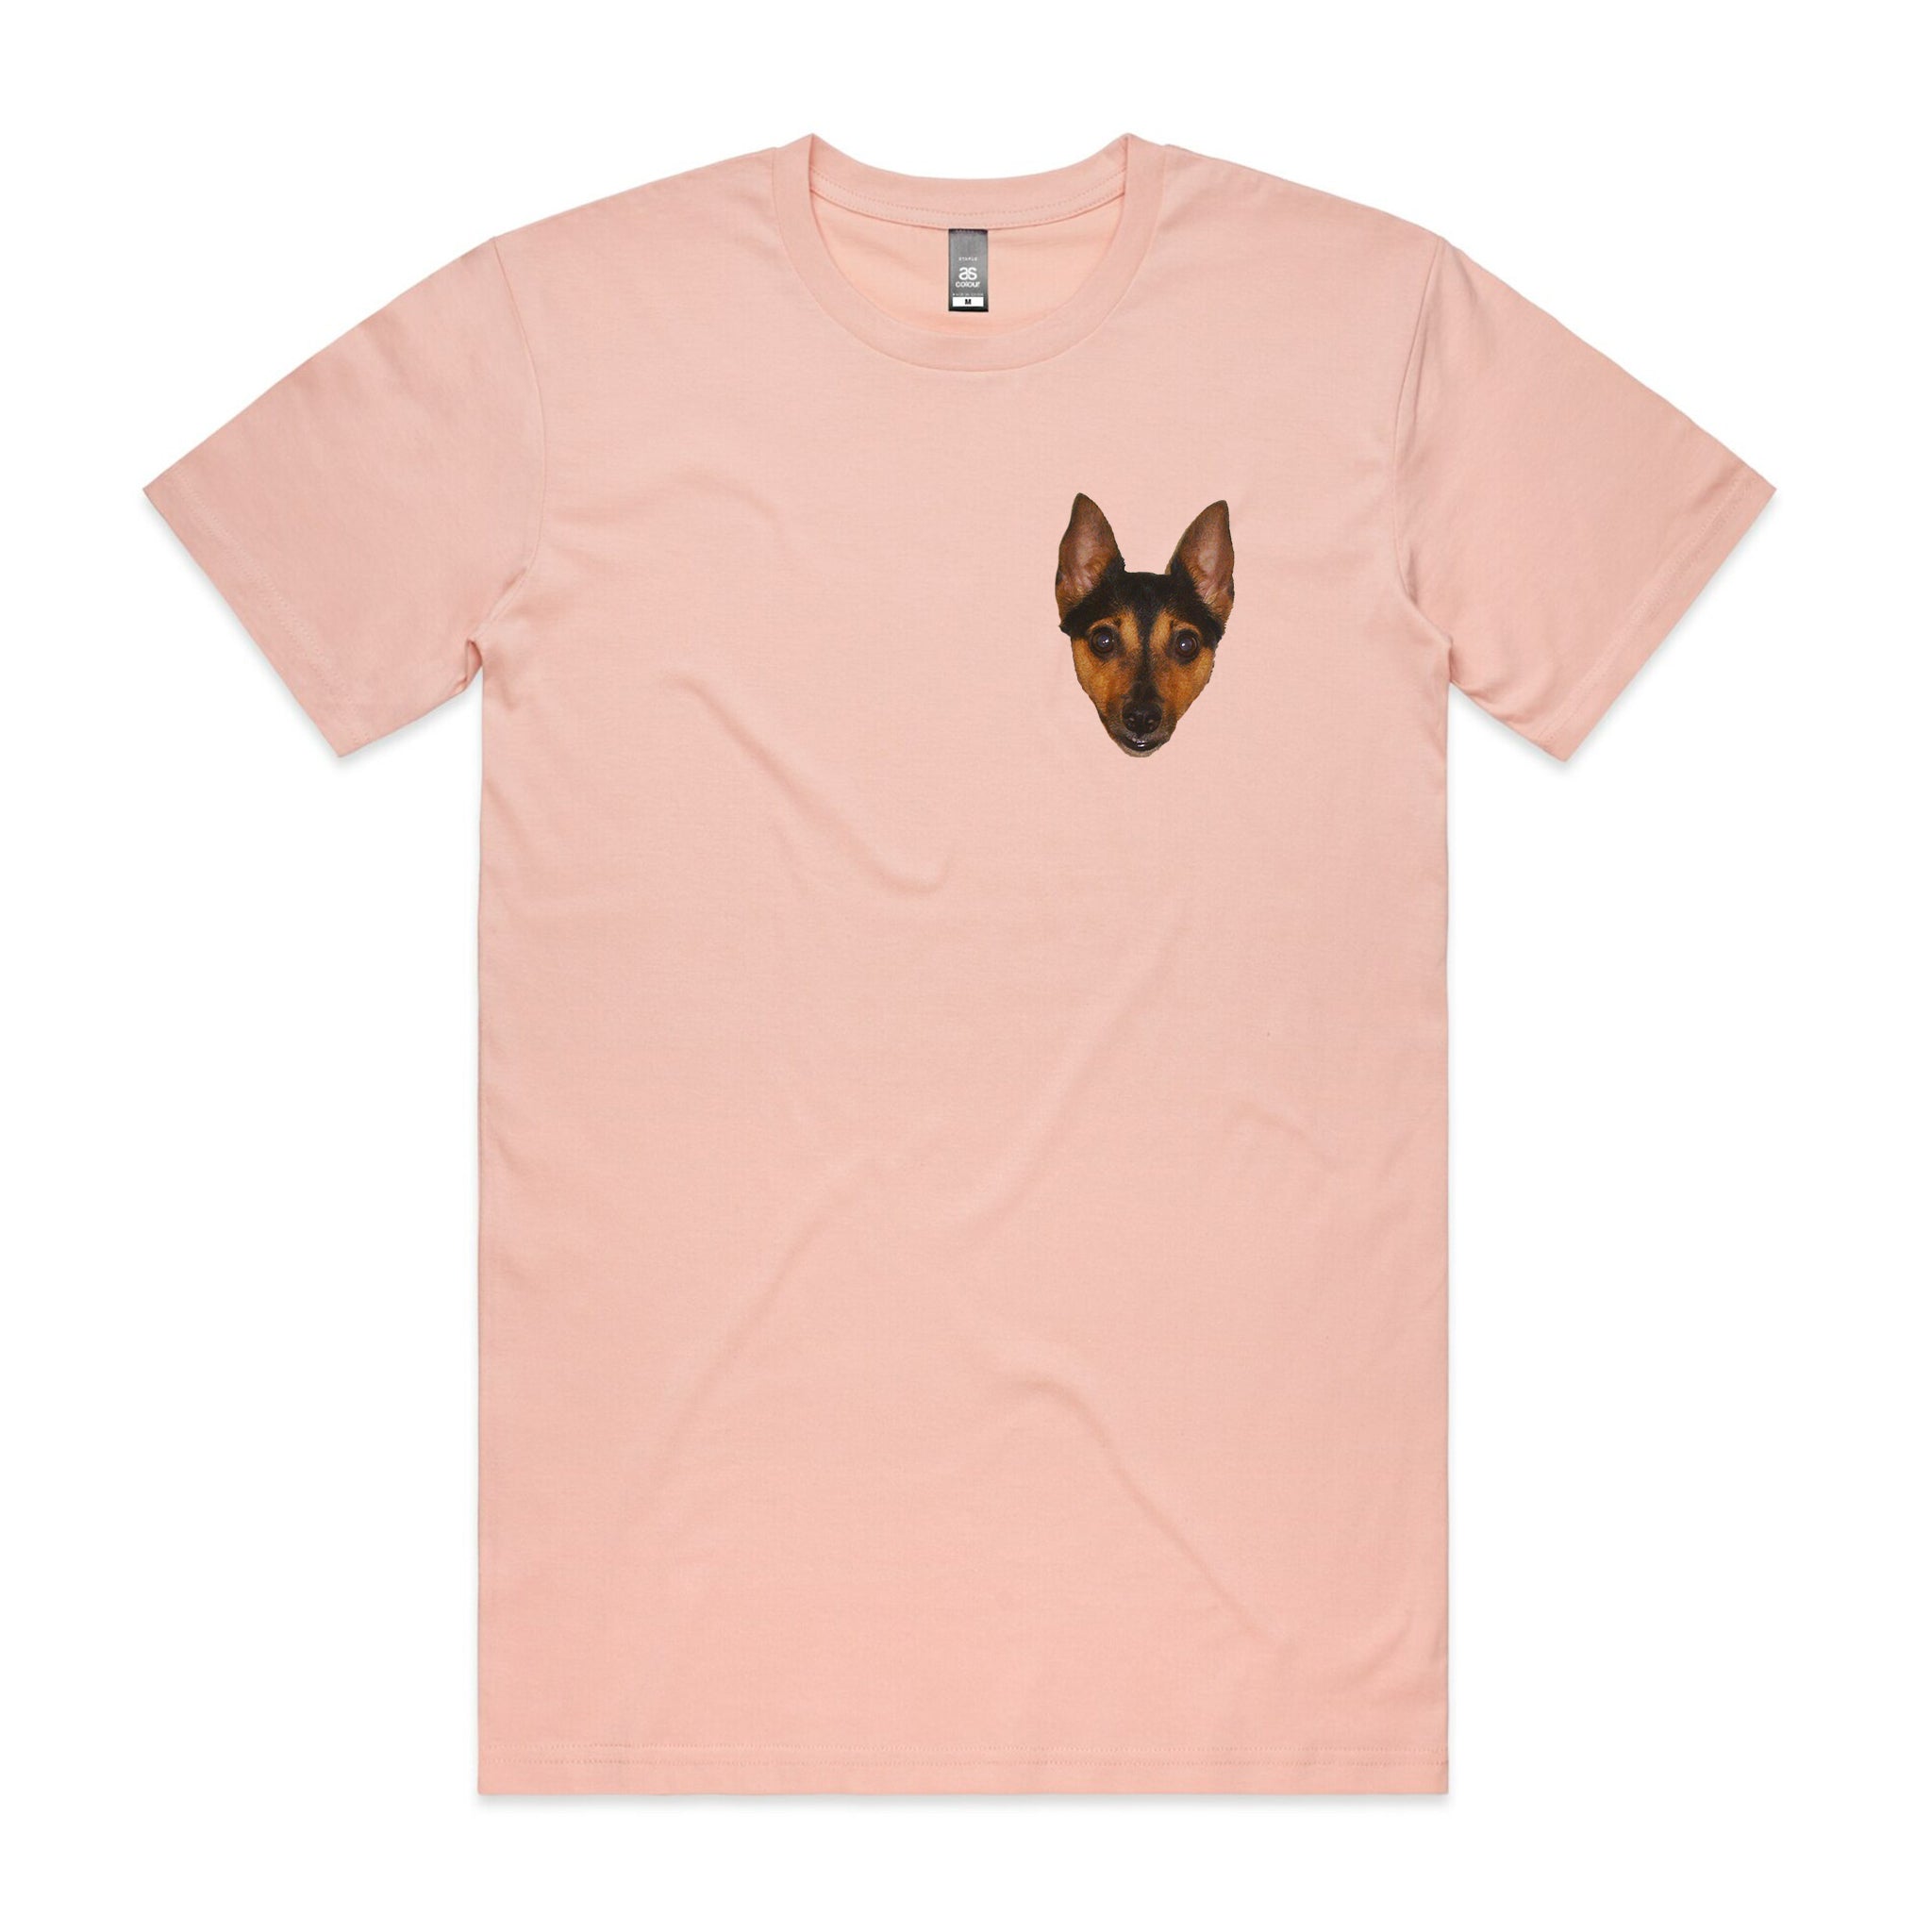 Create Your Own Pet Tee